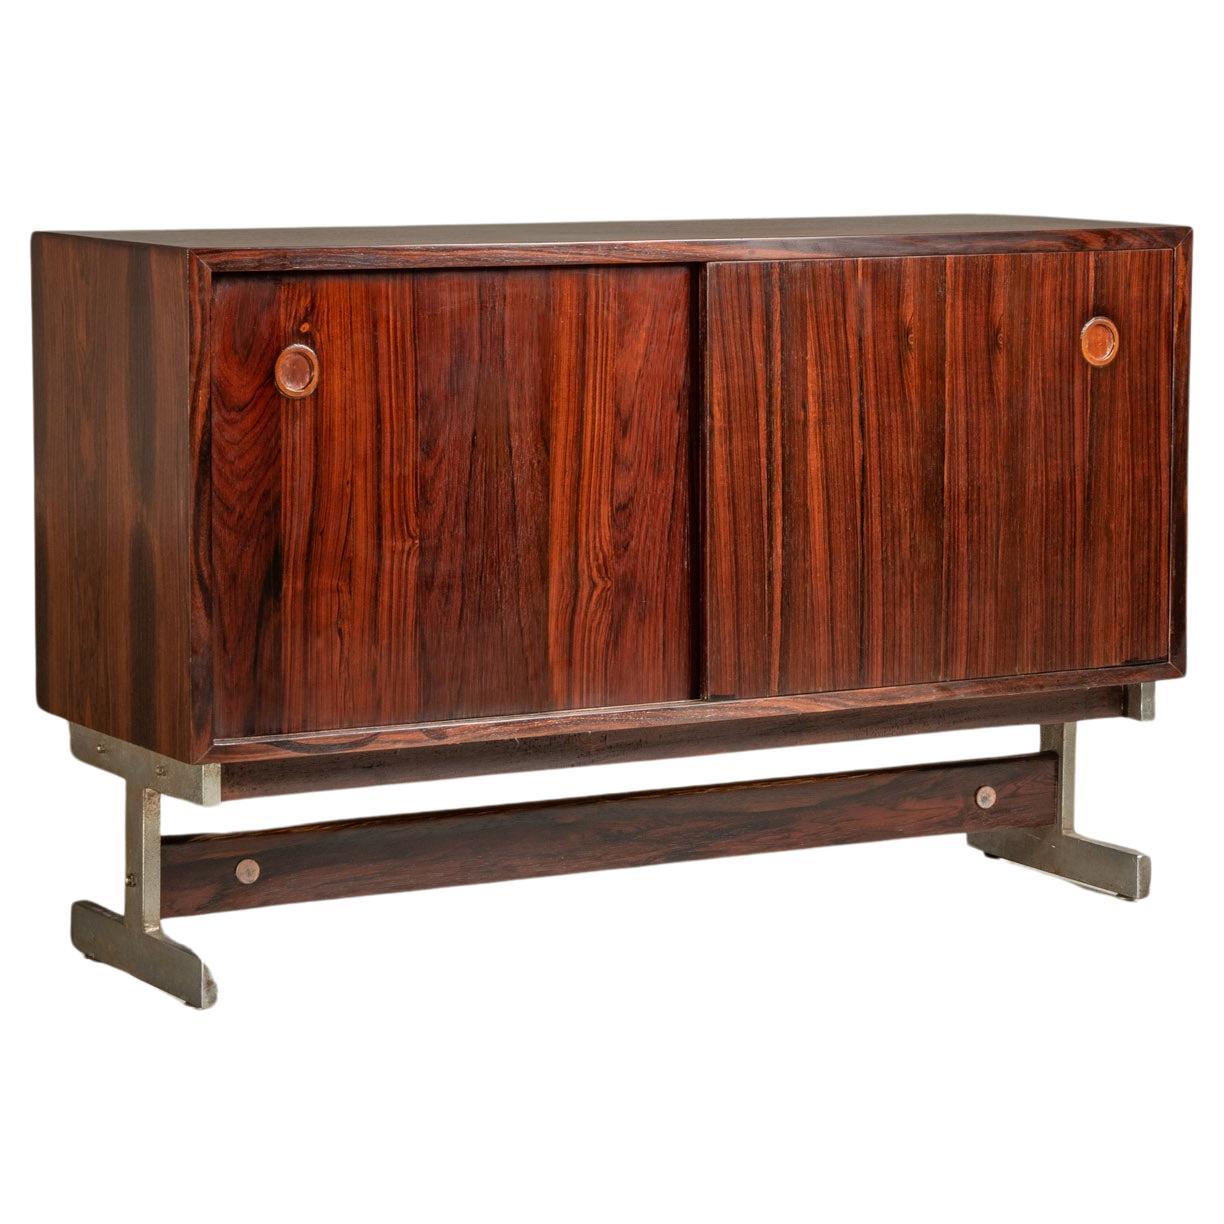 Small Sideboard in Hardwood, by Sergio Rodrigues, Brazilian Mid-Century Modern For Sale